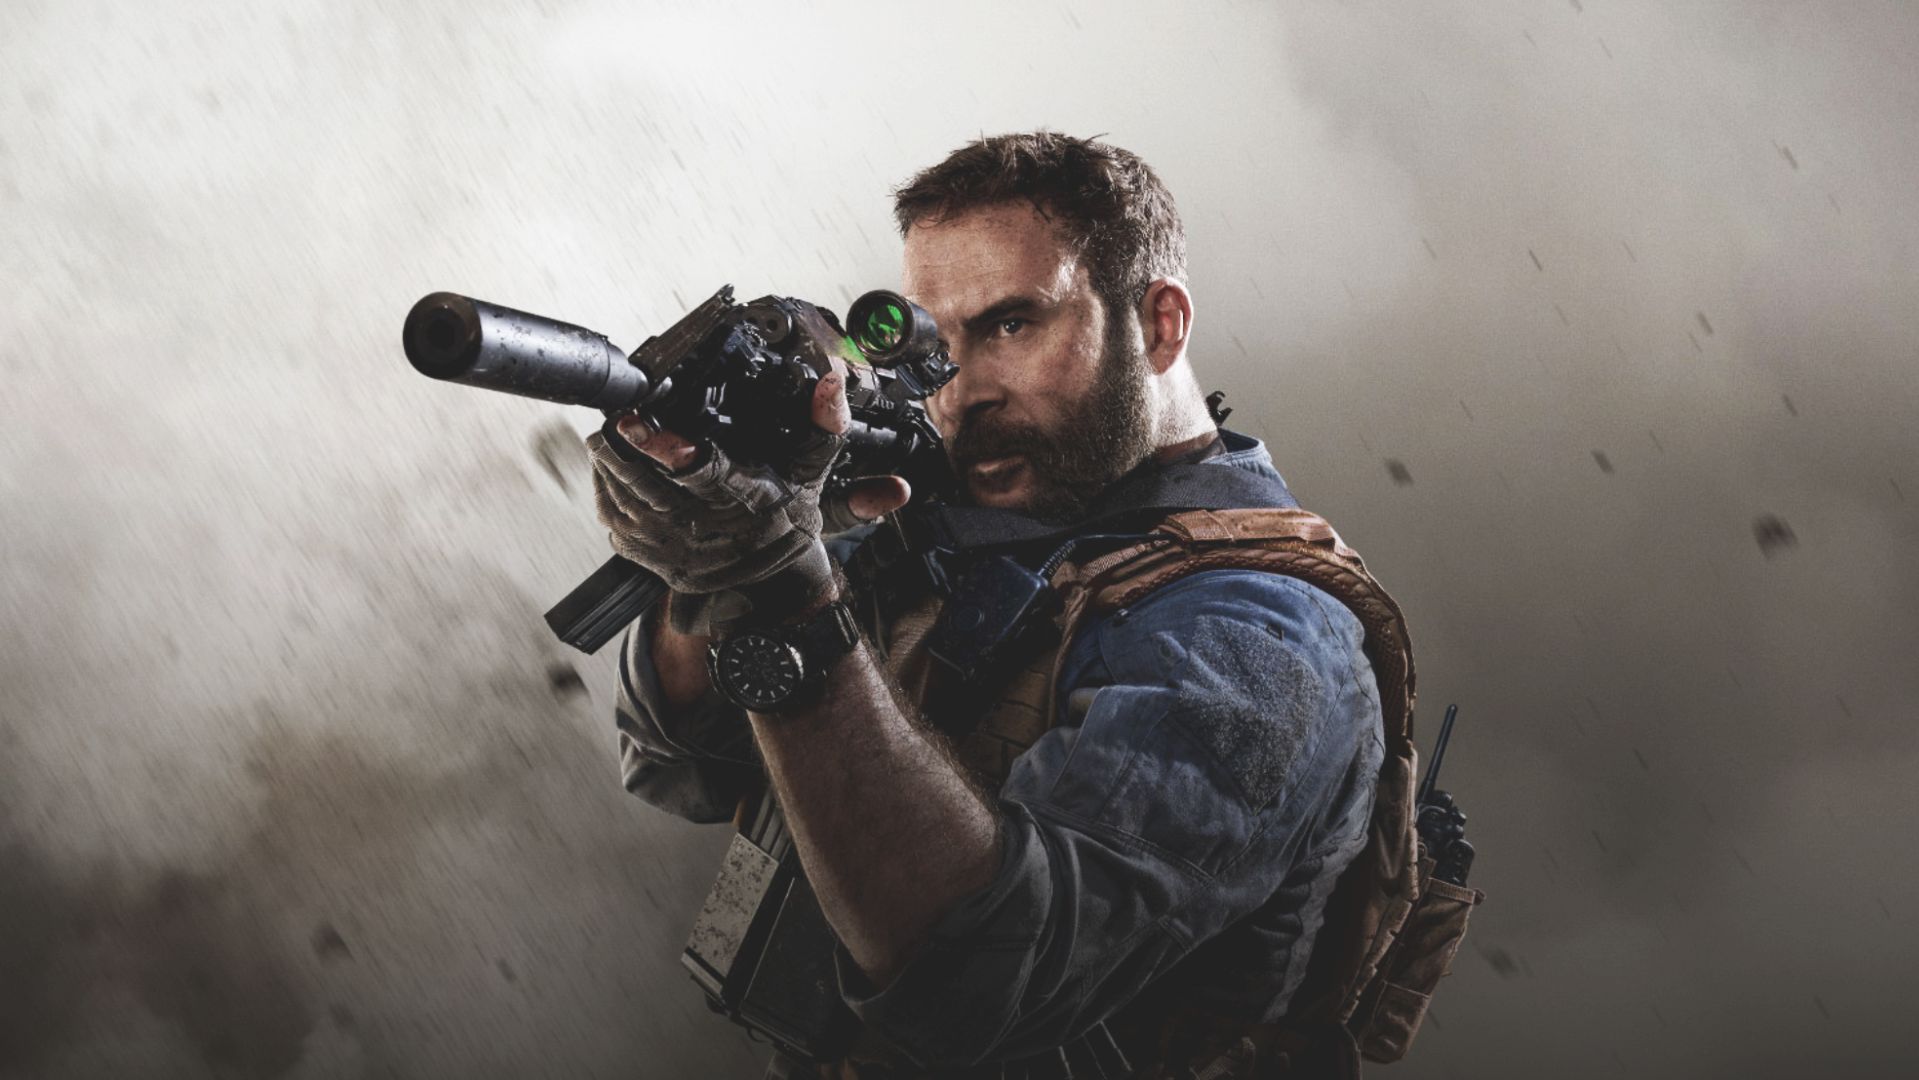 GDC 2020: How Call of Duty: Modern Warfare’s latency got ‘fixed’ after the beta